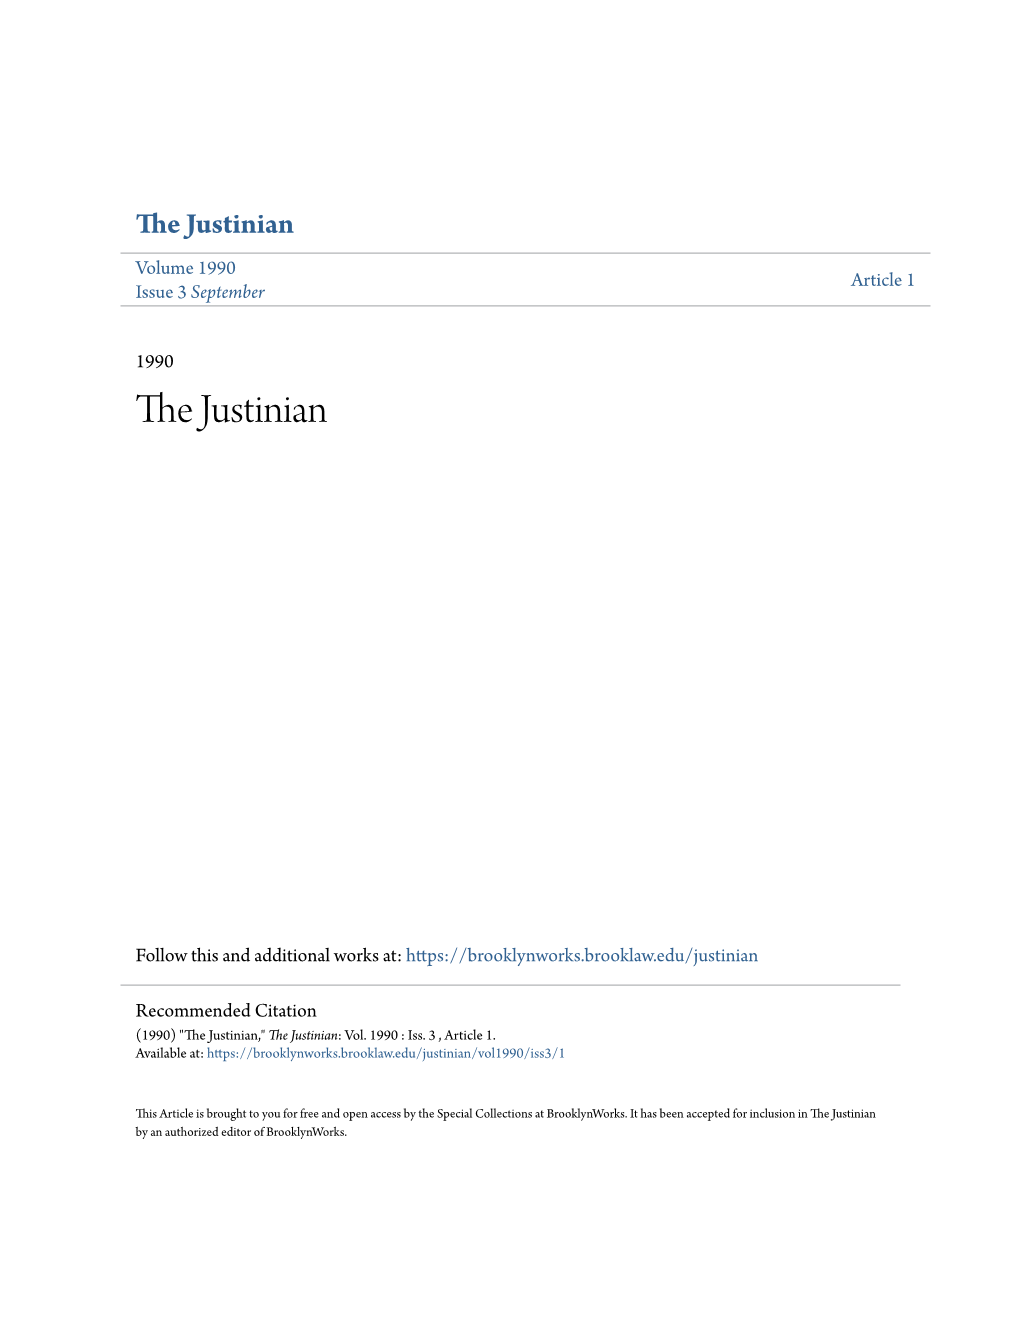 The Justinian Volume 1990 Article 1 Issue 3 September